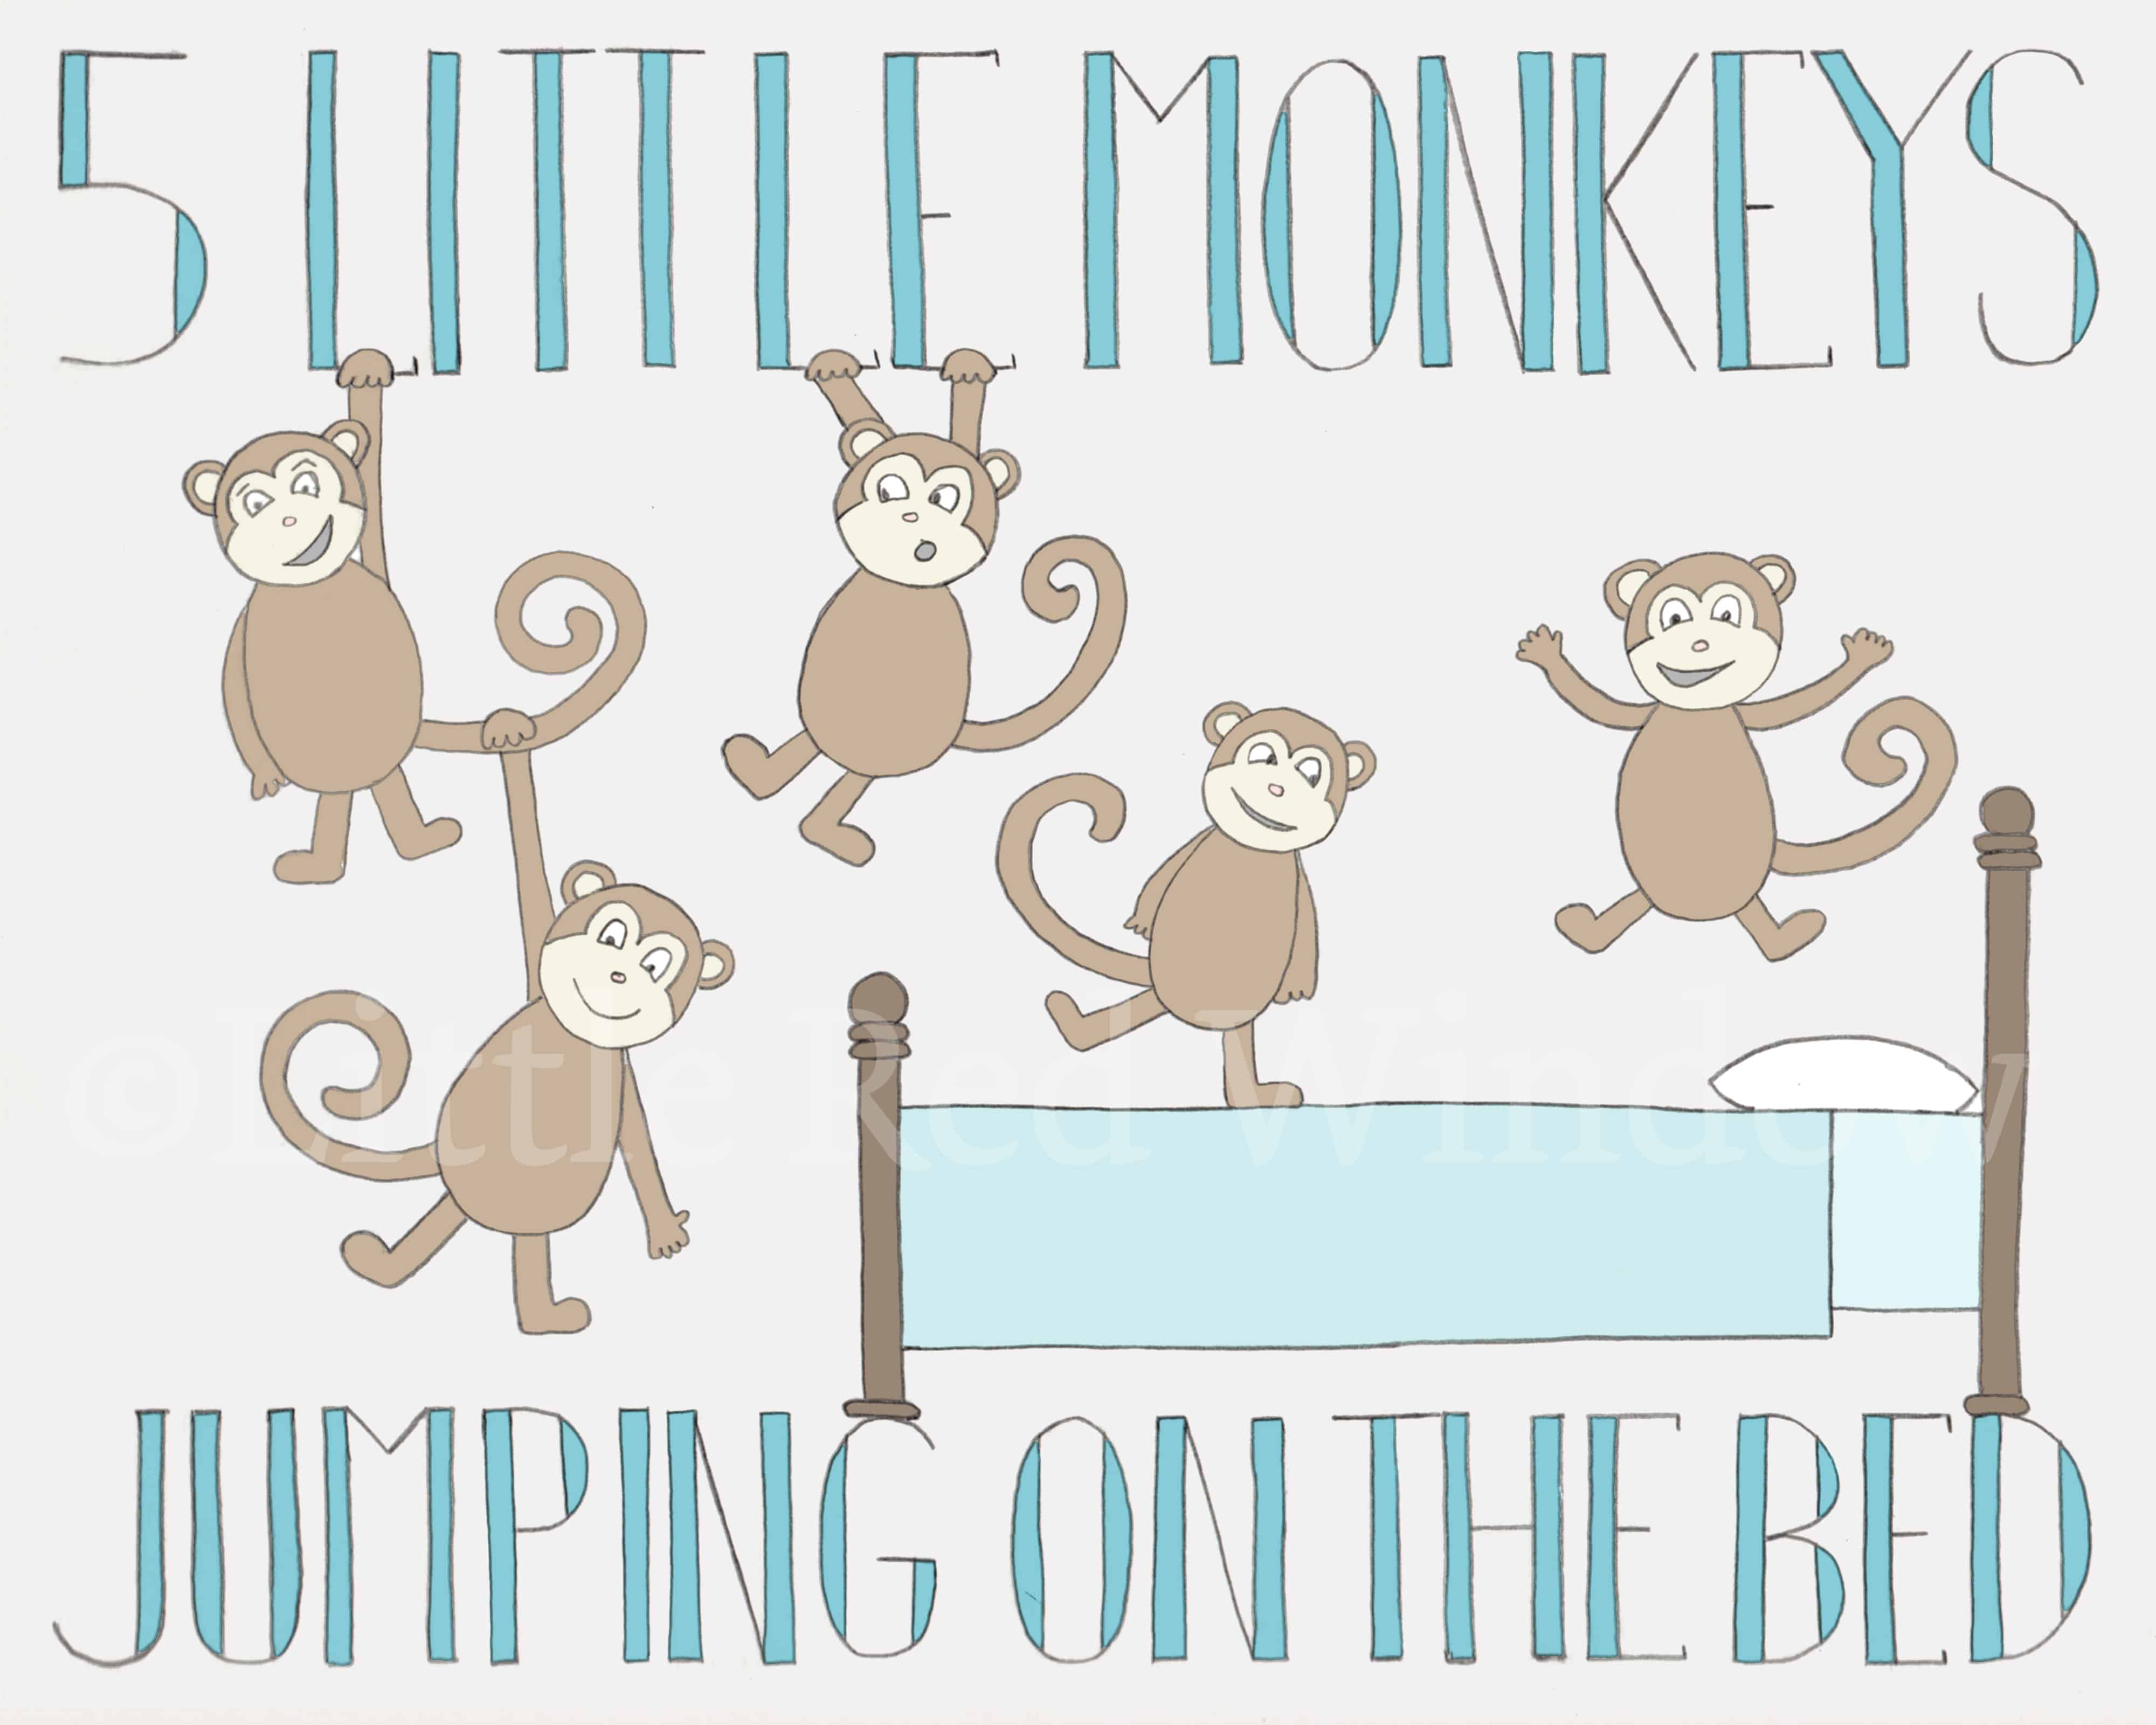 drawing of 5 monkeys jumping on a bed